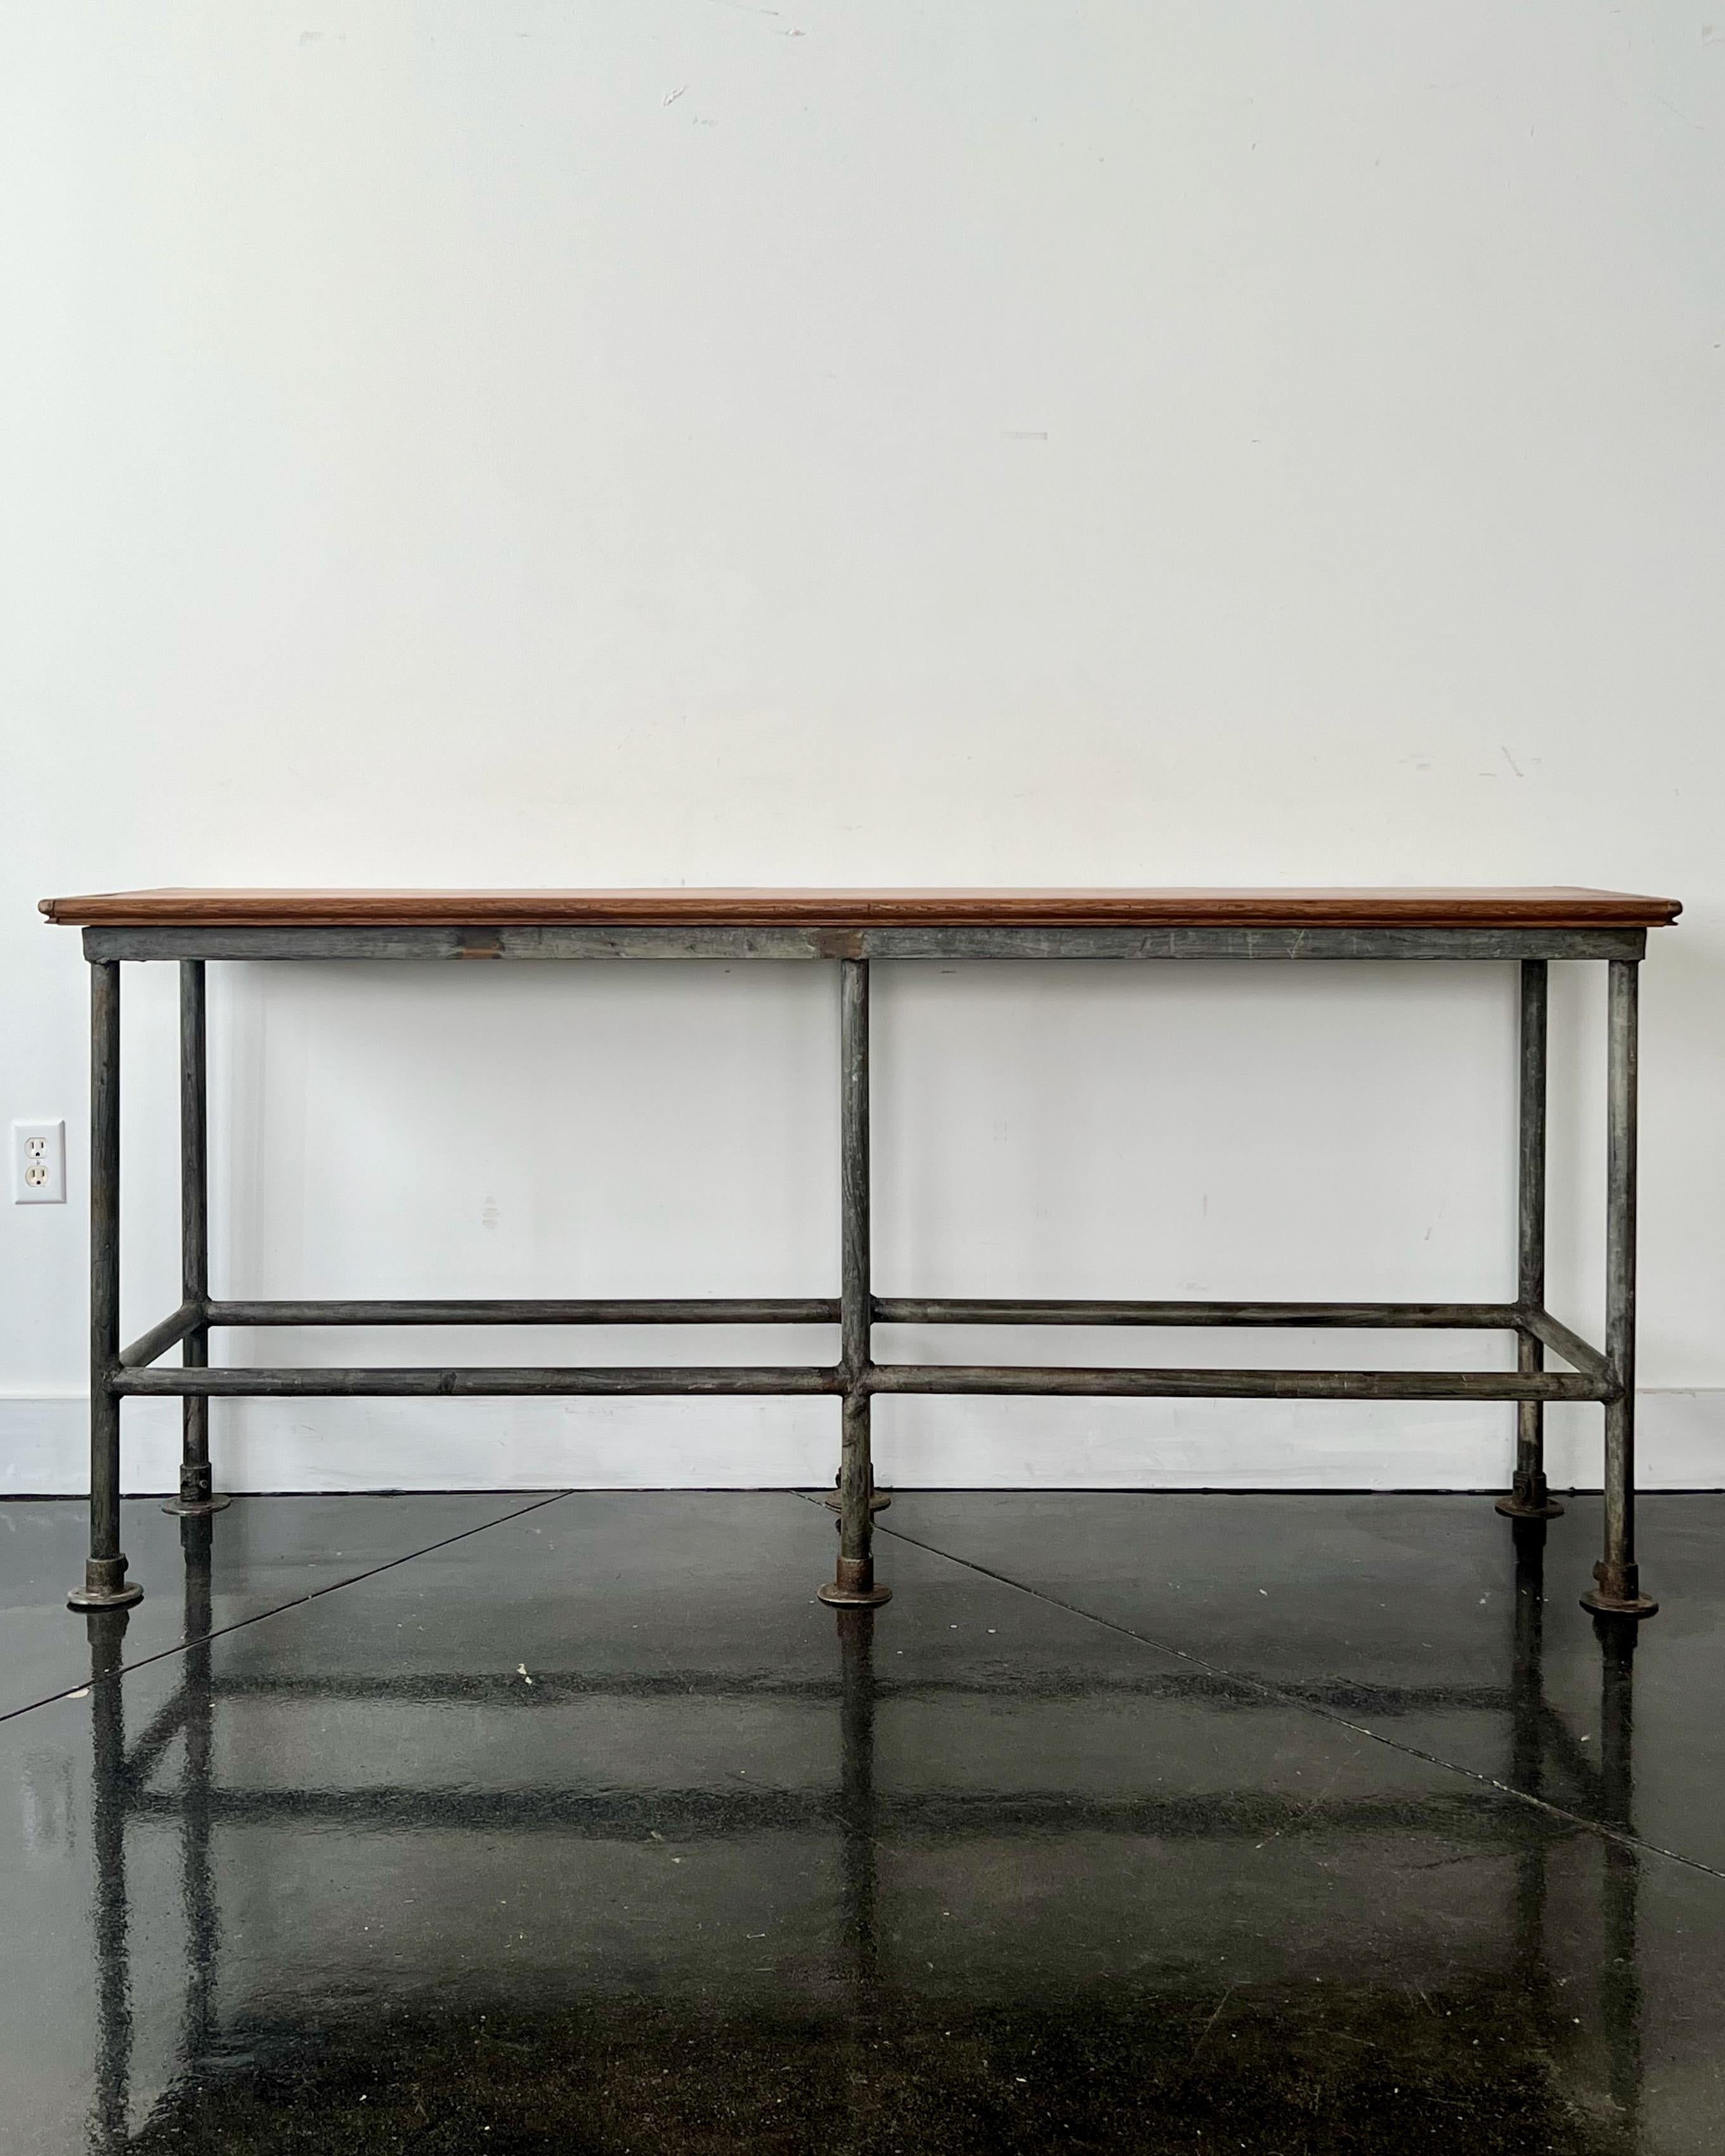 The antique Industrial work table/console table with cast iron base holds solid oak planks top.
With clean lines this table is ideal for many uses:
kitchen work table, hall console, bar table, home office desk etc.
